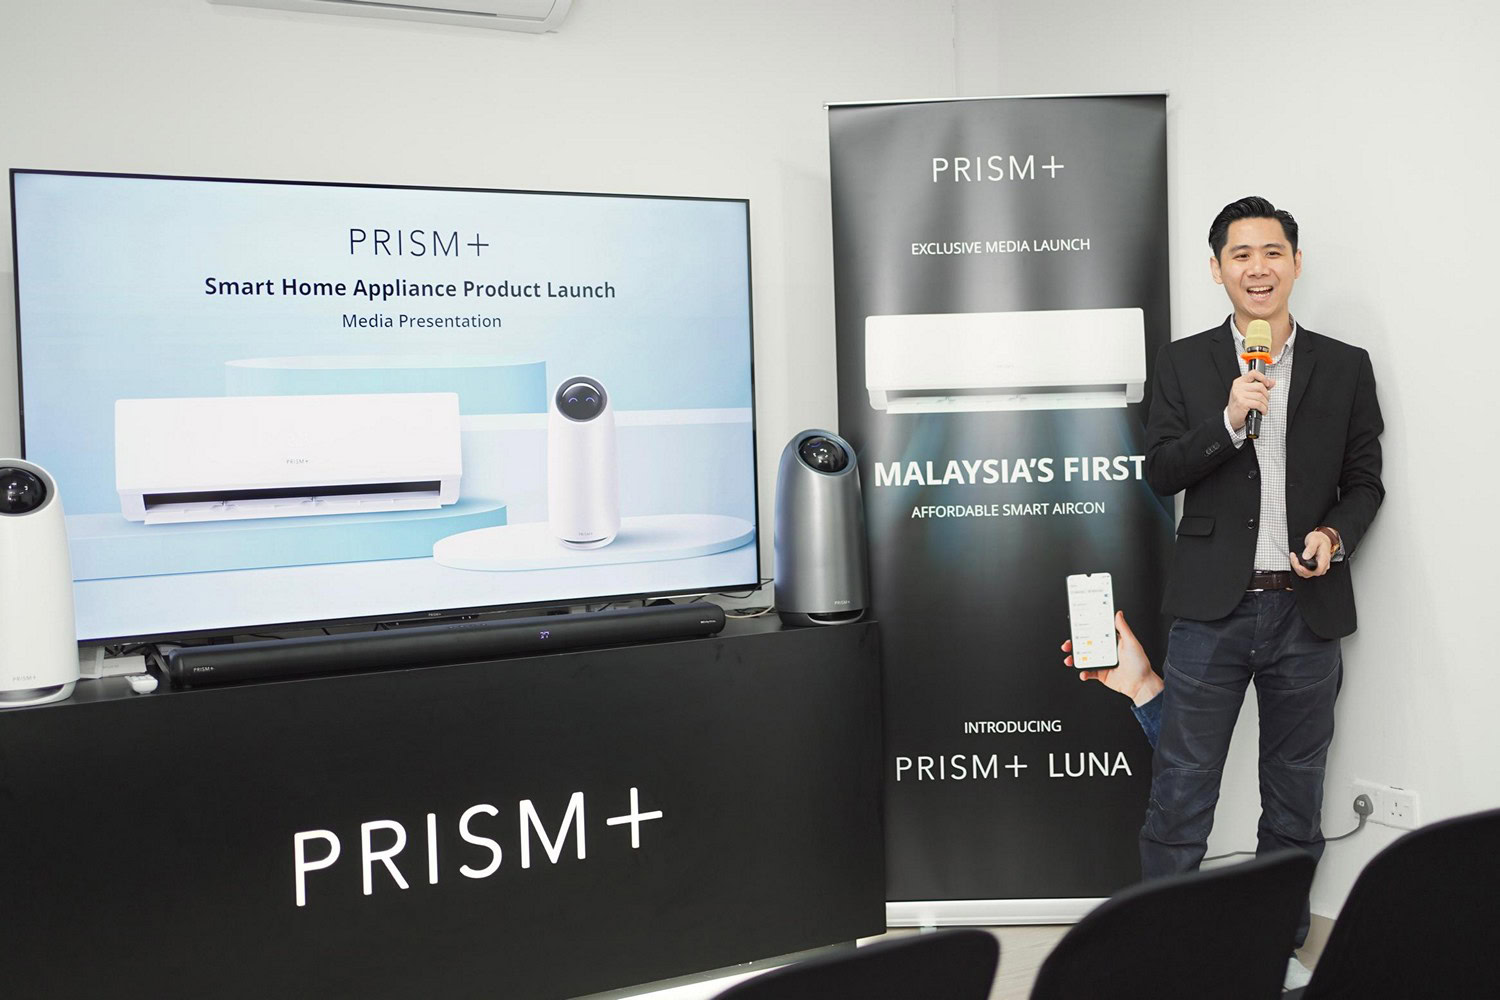 PRISM+ Luna Smart Air Conditioner and Aura Air Purifier Launched - Affordable Smart Home Solutions Now Available in Malaysia